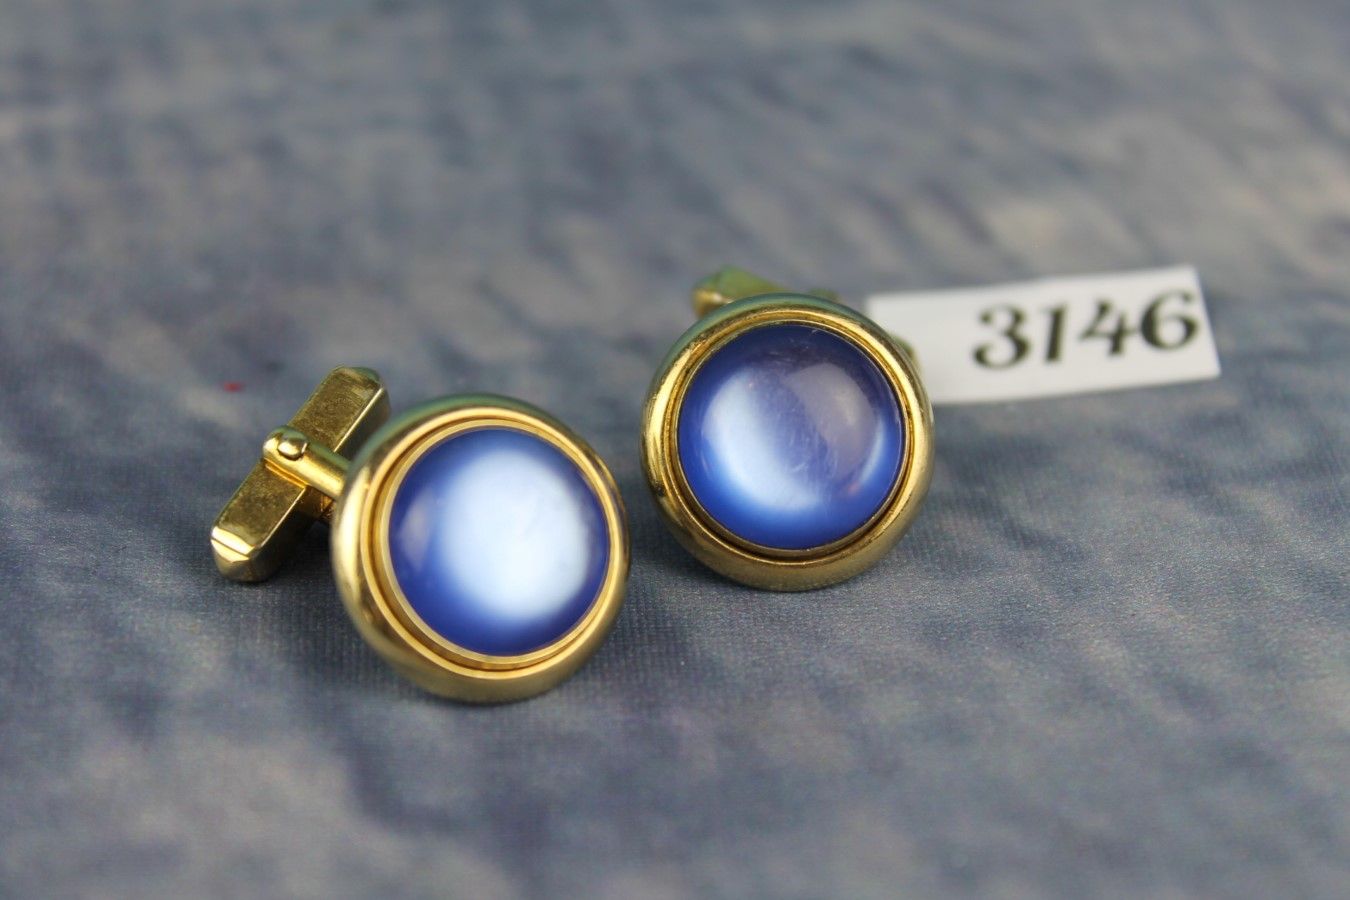 Vintage Swank Gold Metal Pearly Blue Lucite Cabochon Cufflinks